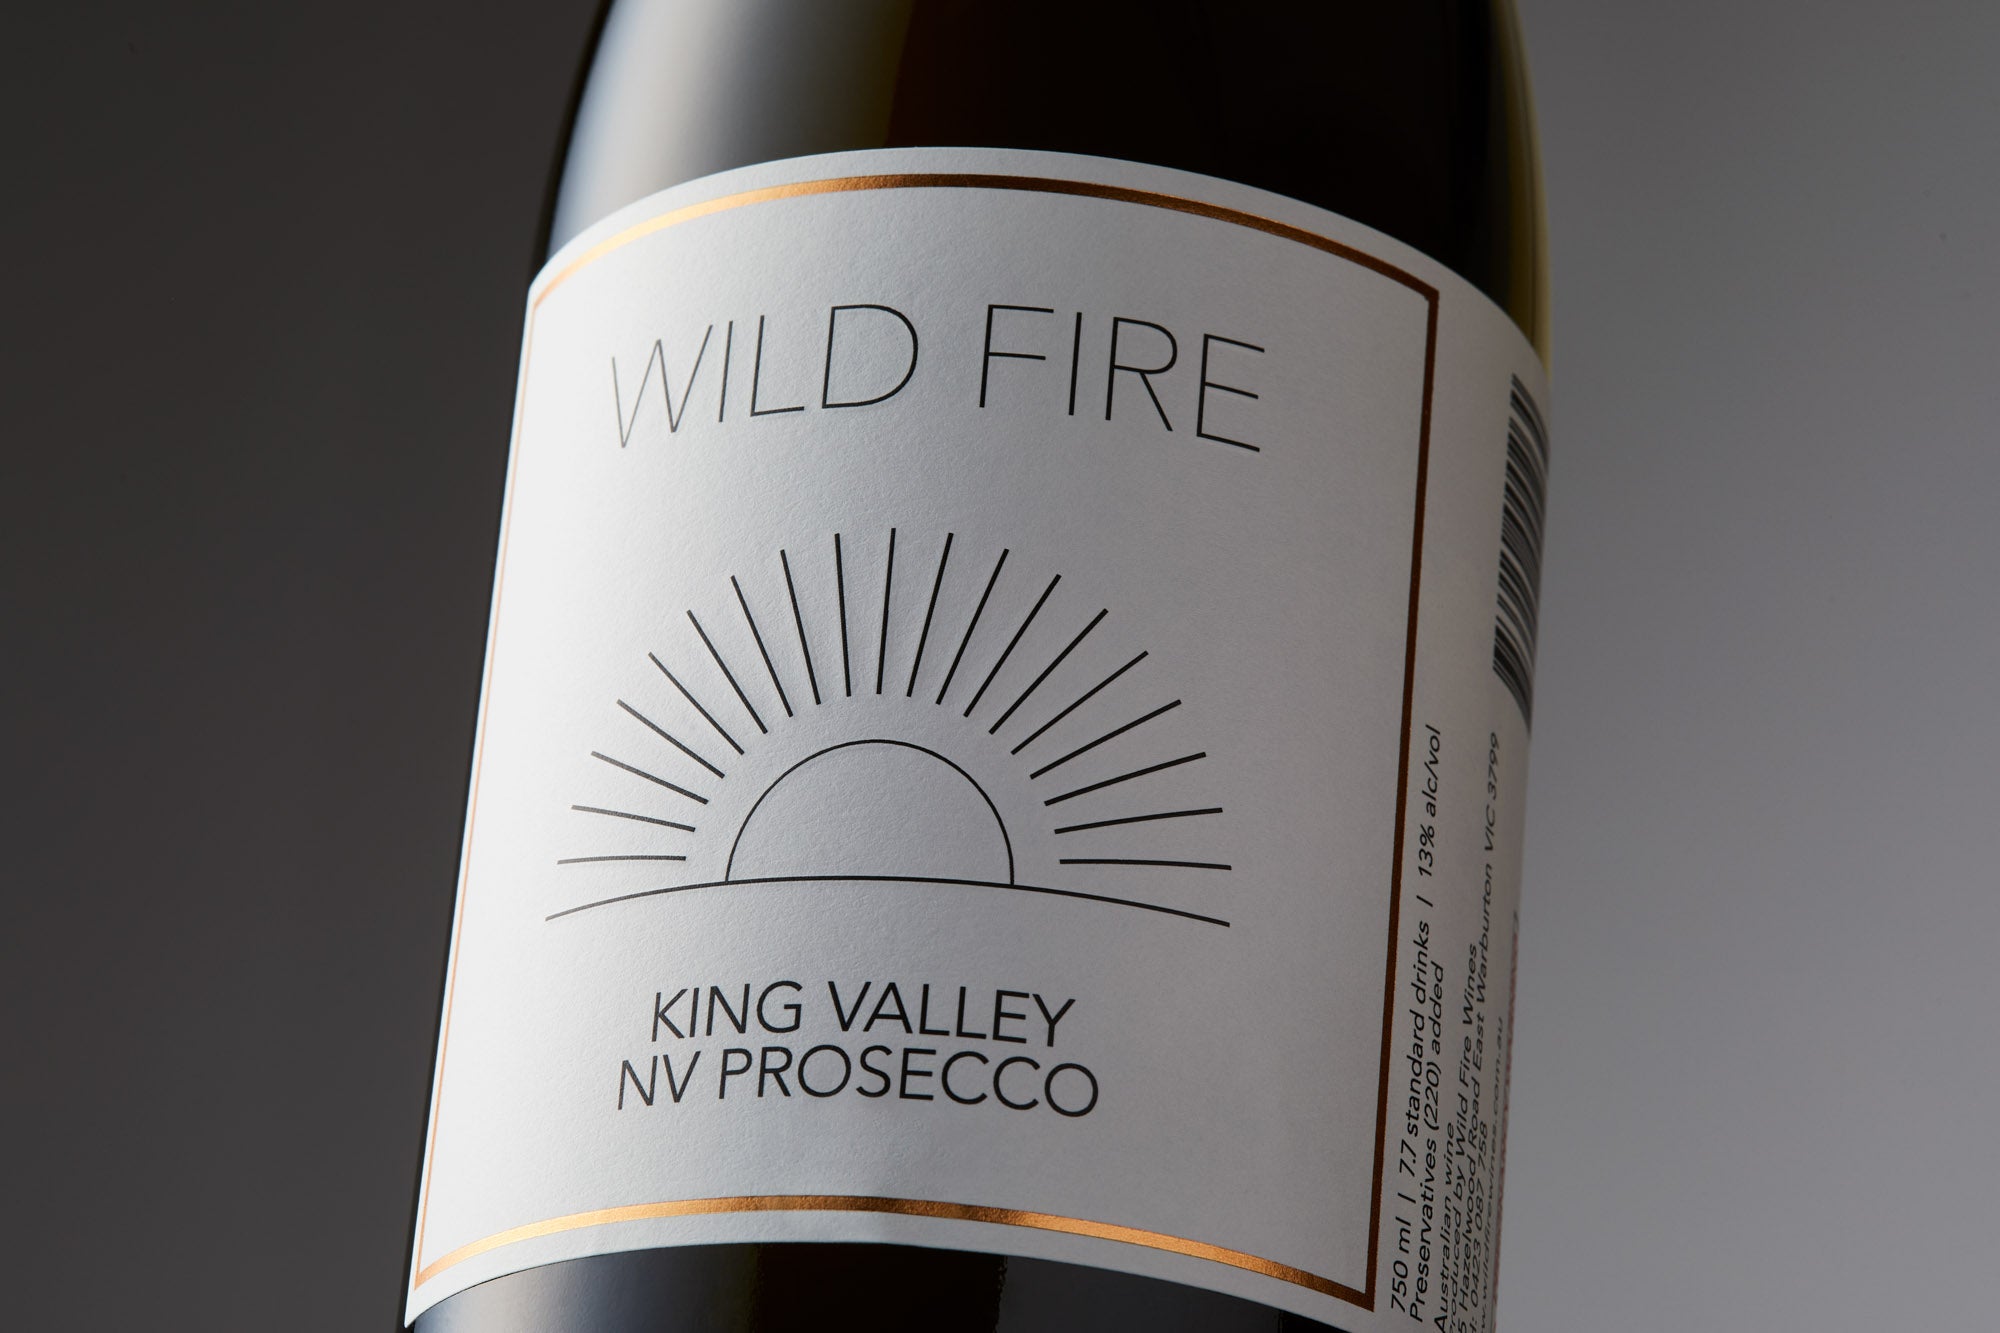 Wild Fire King Valley Prosecco NV